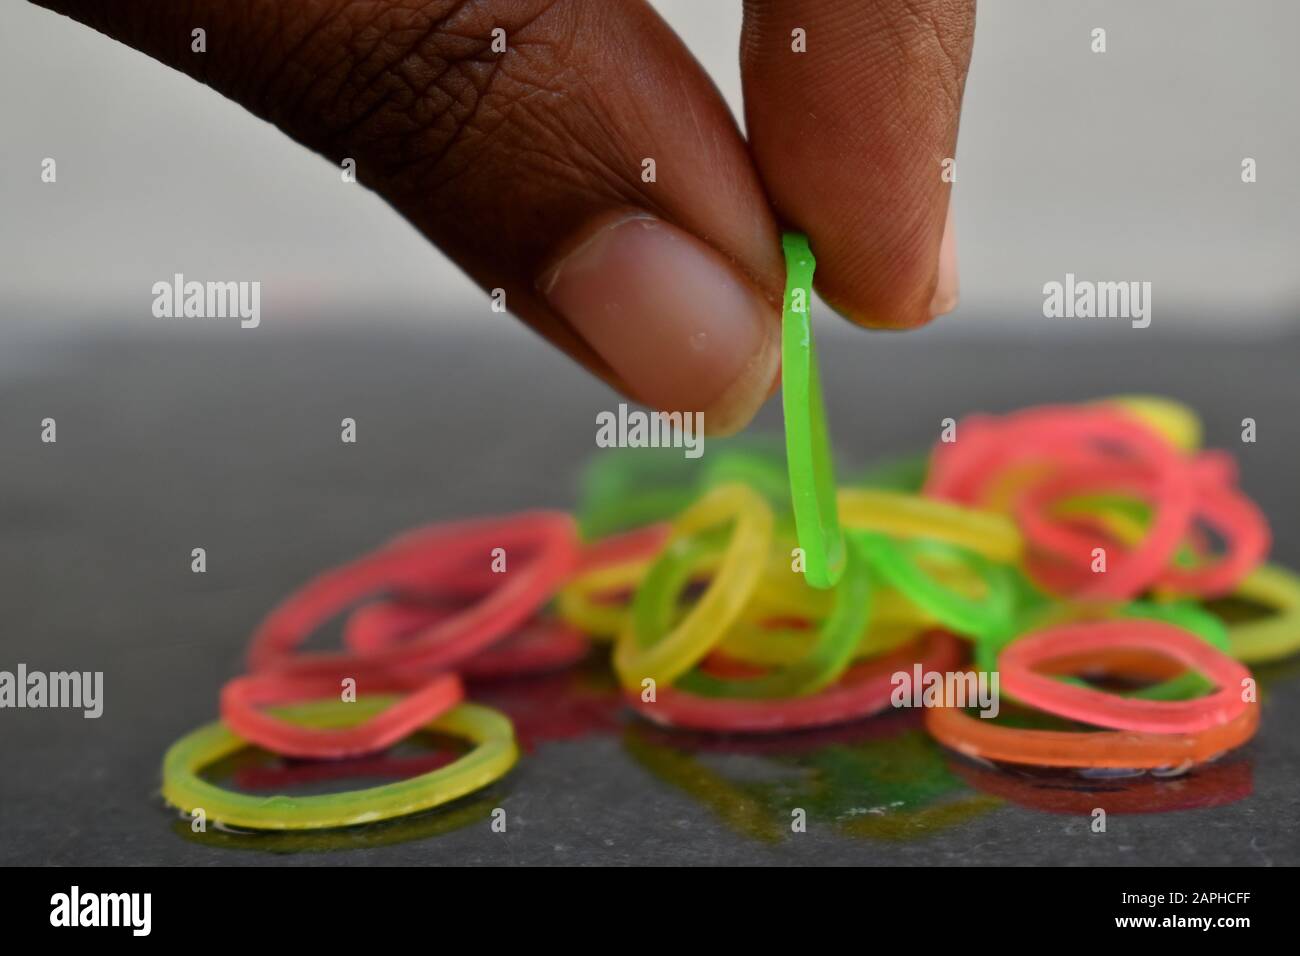 Multi color rubber bands picked by hand. Rubber bands and fingers. Rubber bands thrown from hand. Stock Photo